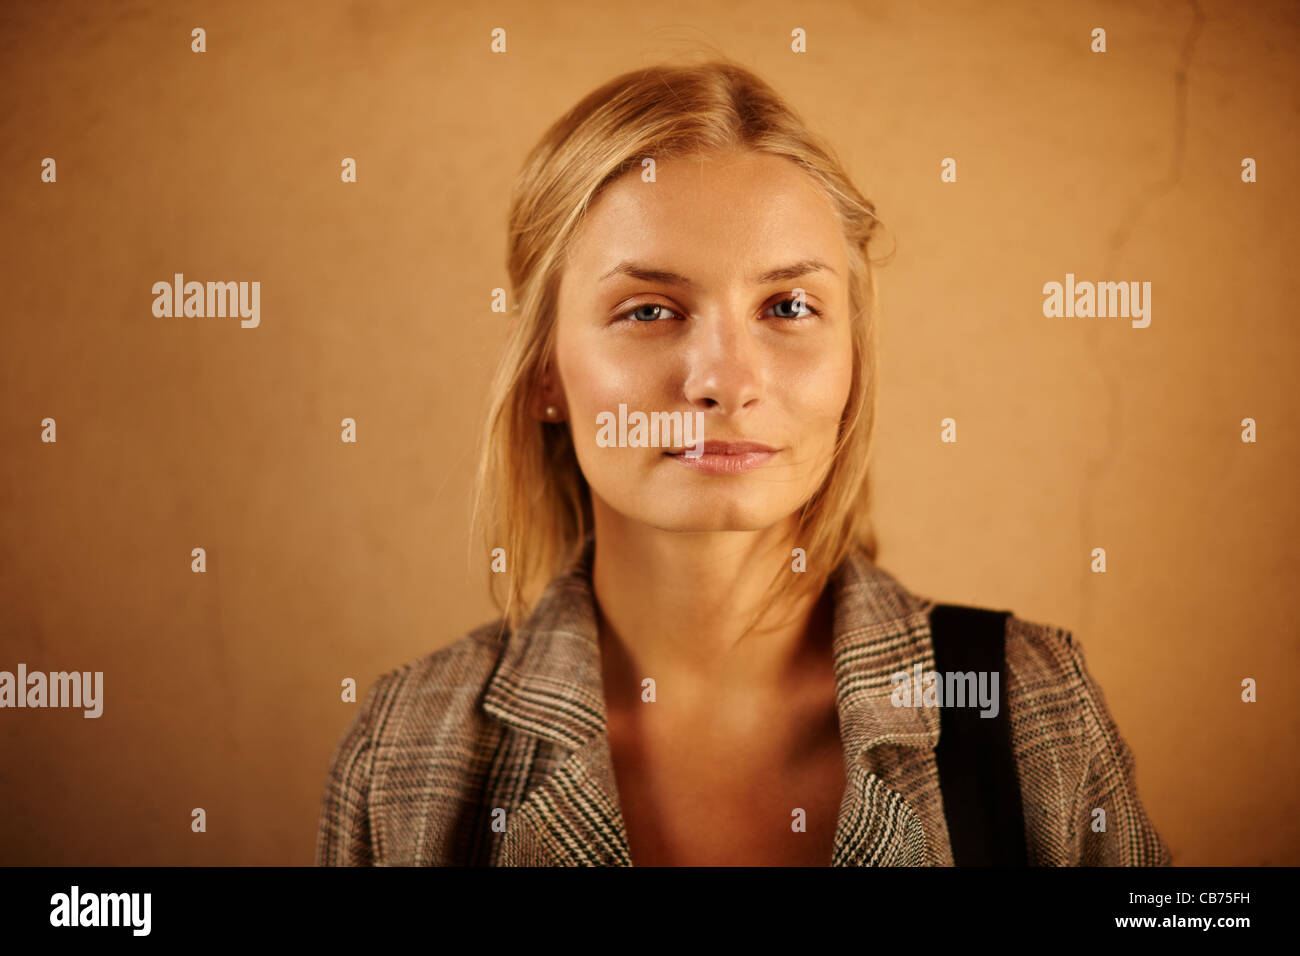 intelligent young woman Stock Photo